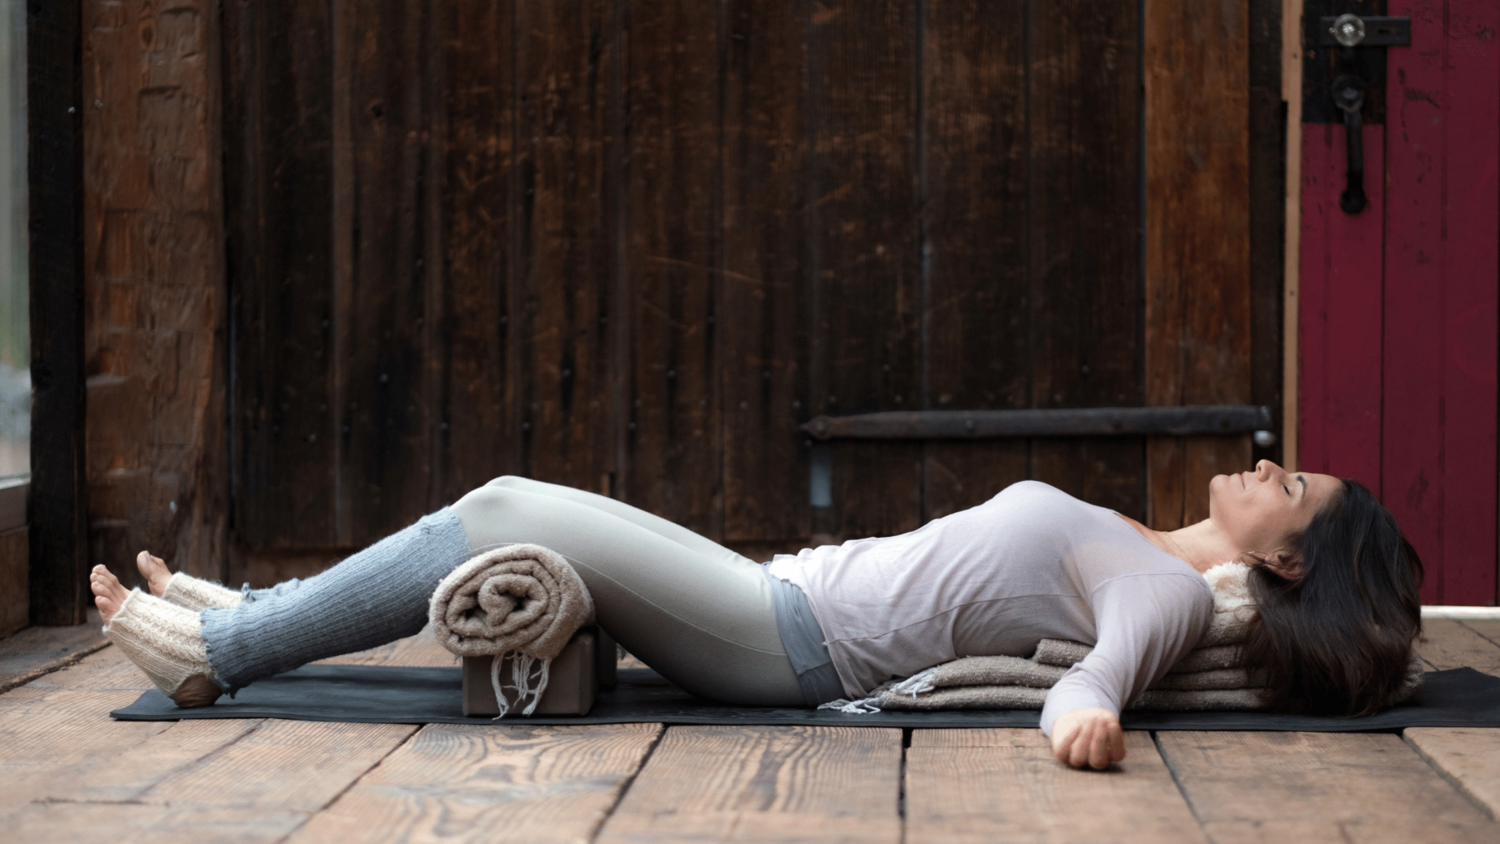 Restorative Yoga With Props for Relaxation 